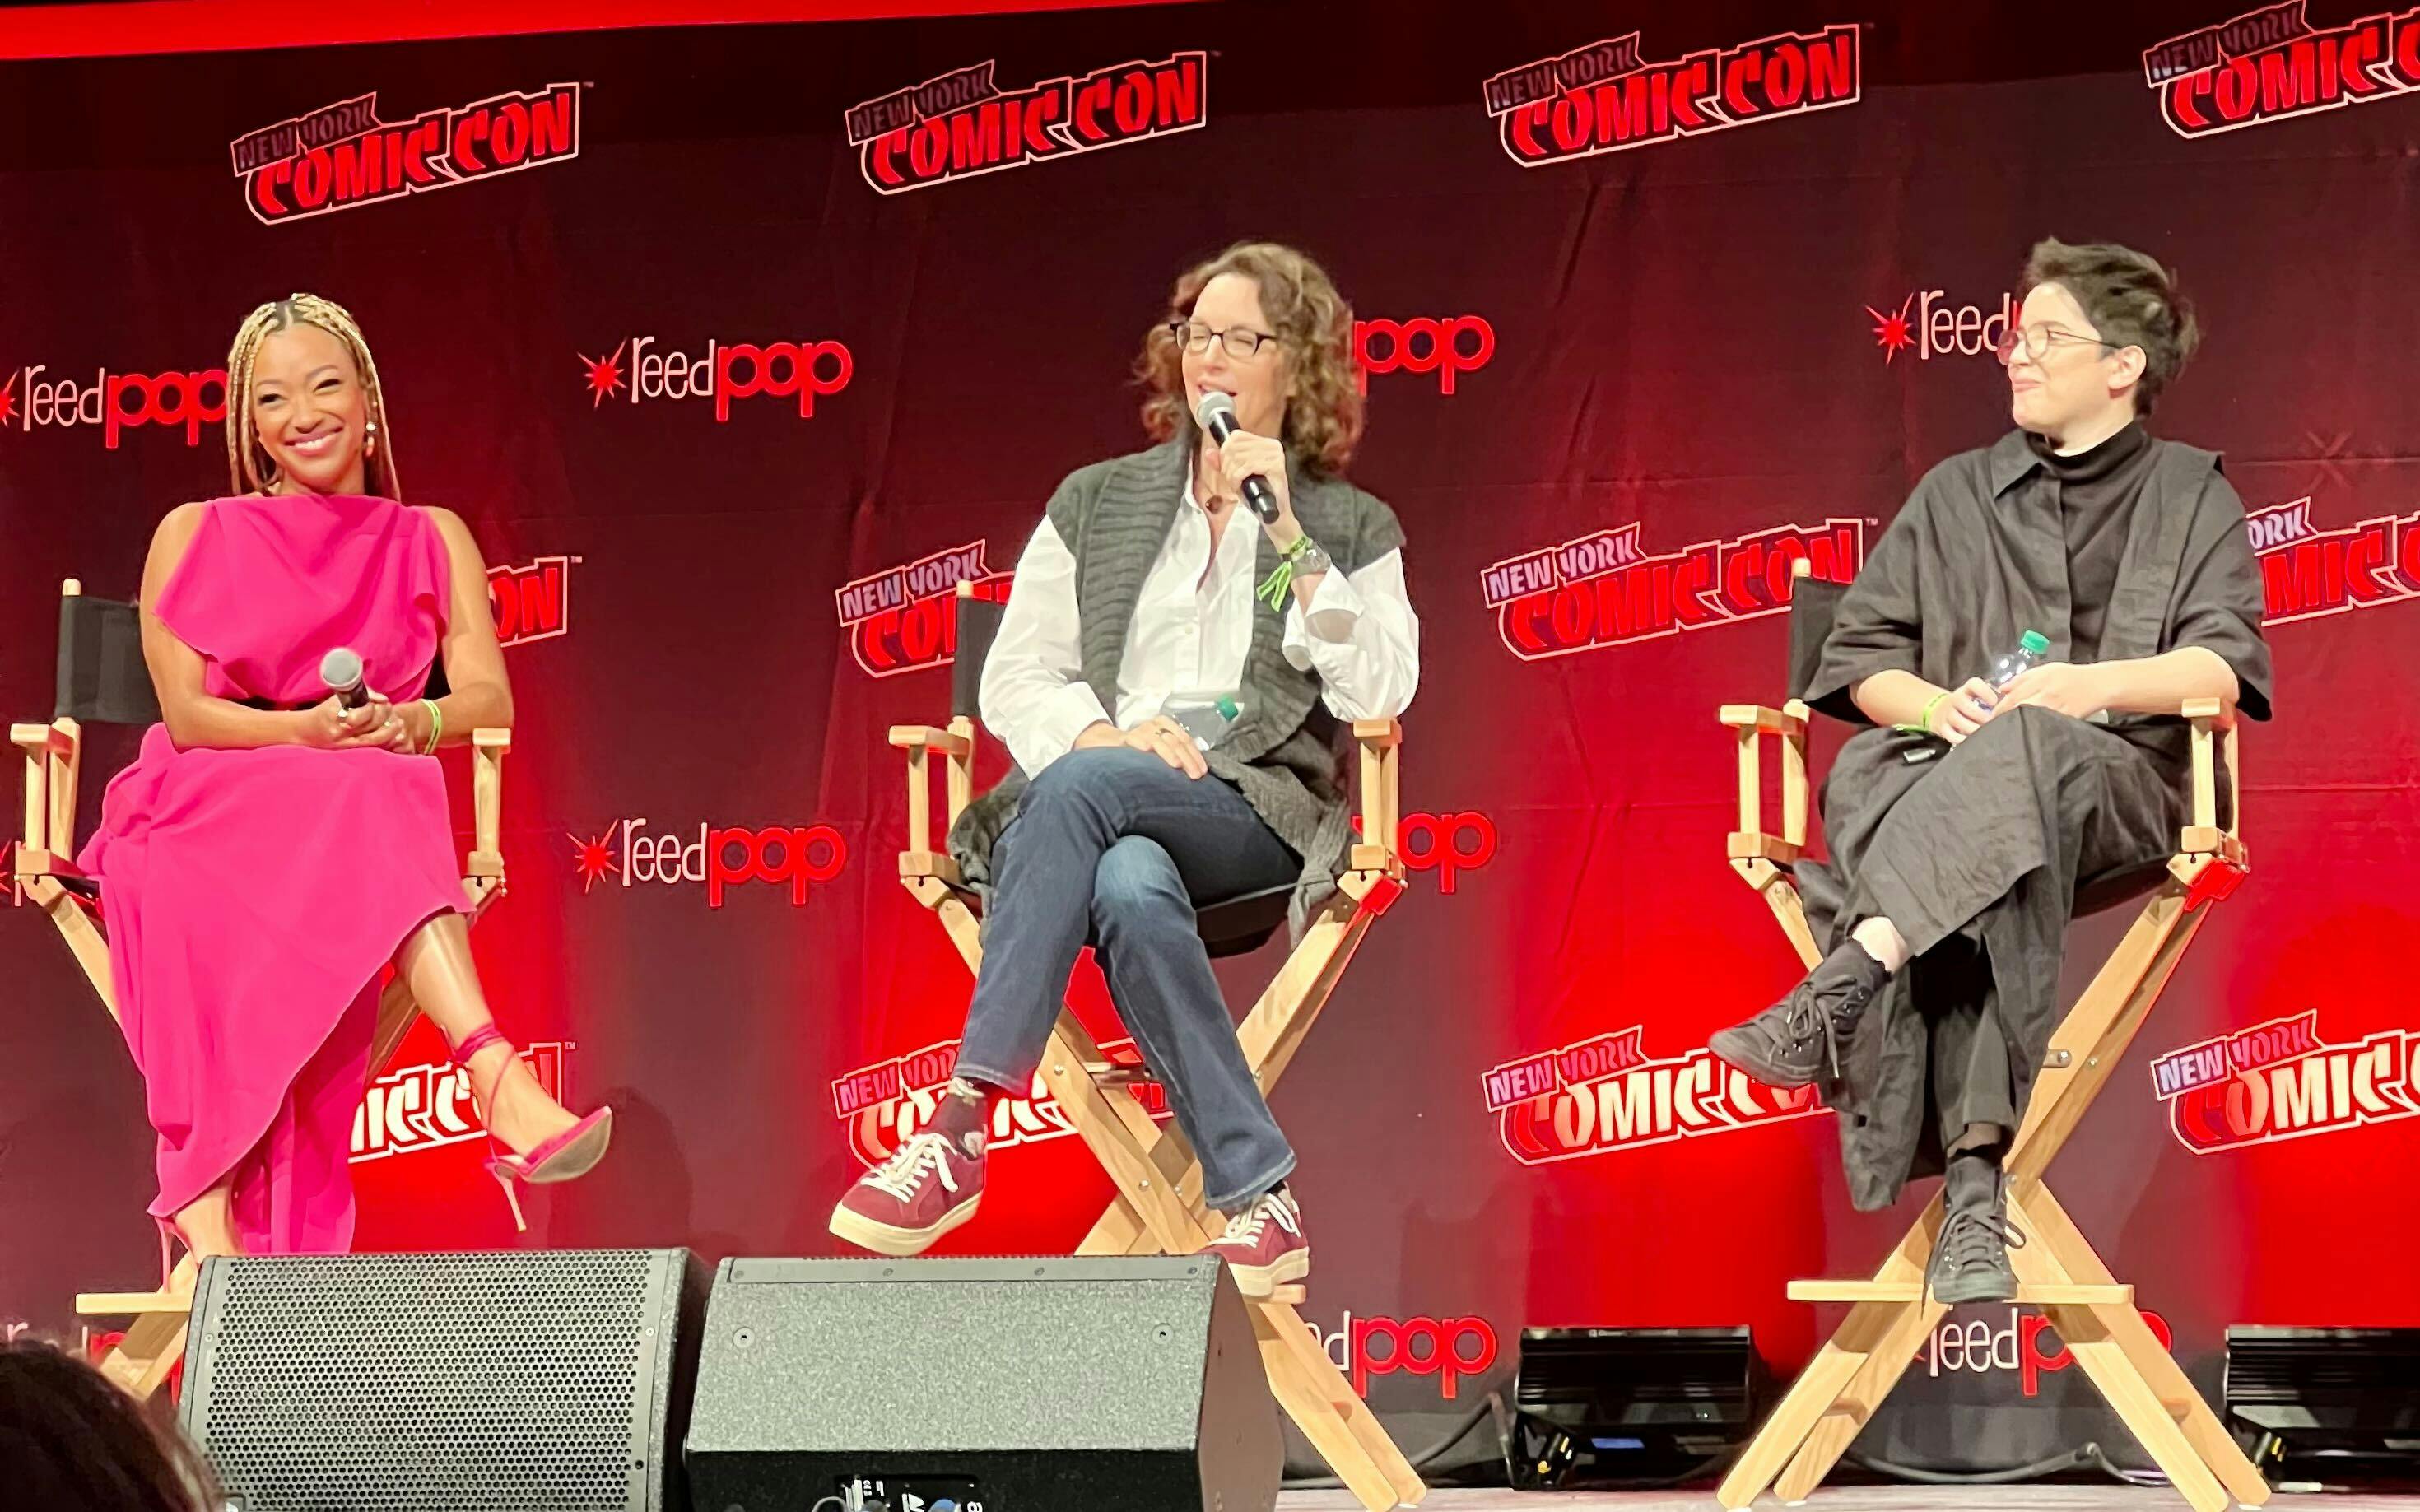 Star Trek: Discovery Beams Down to NYCC 